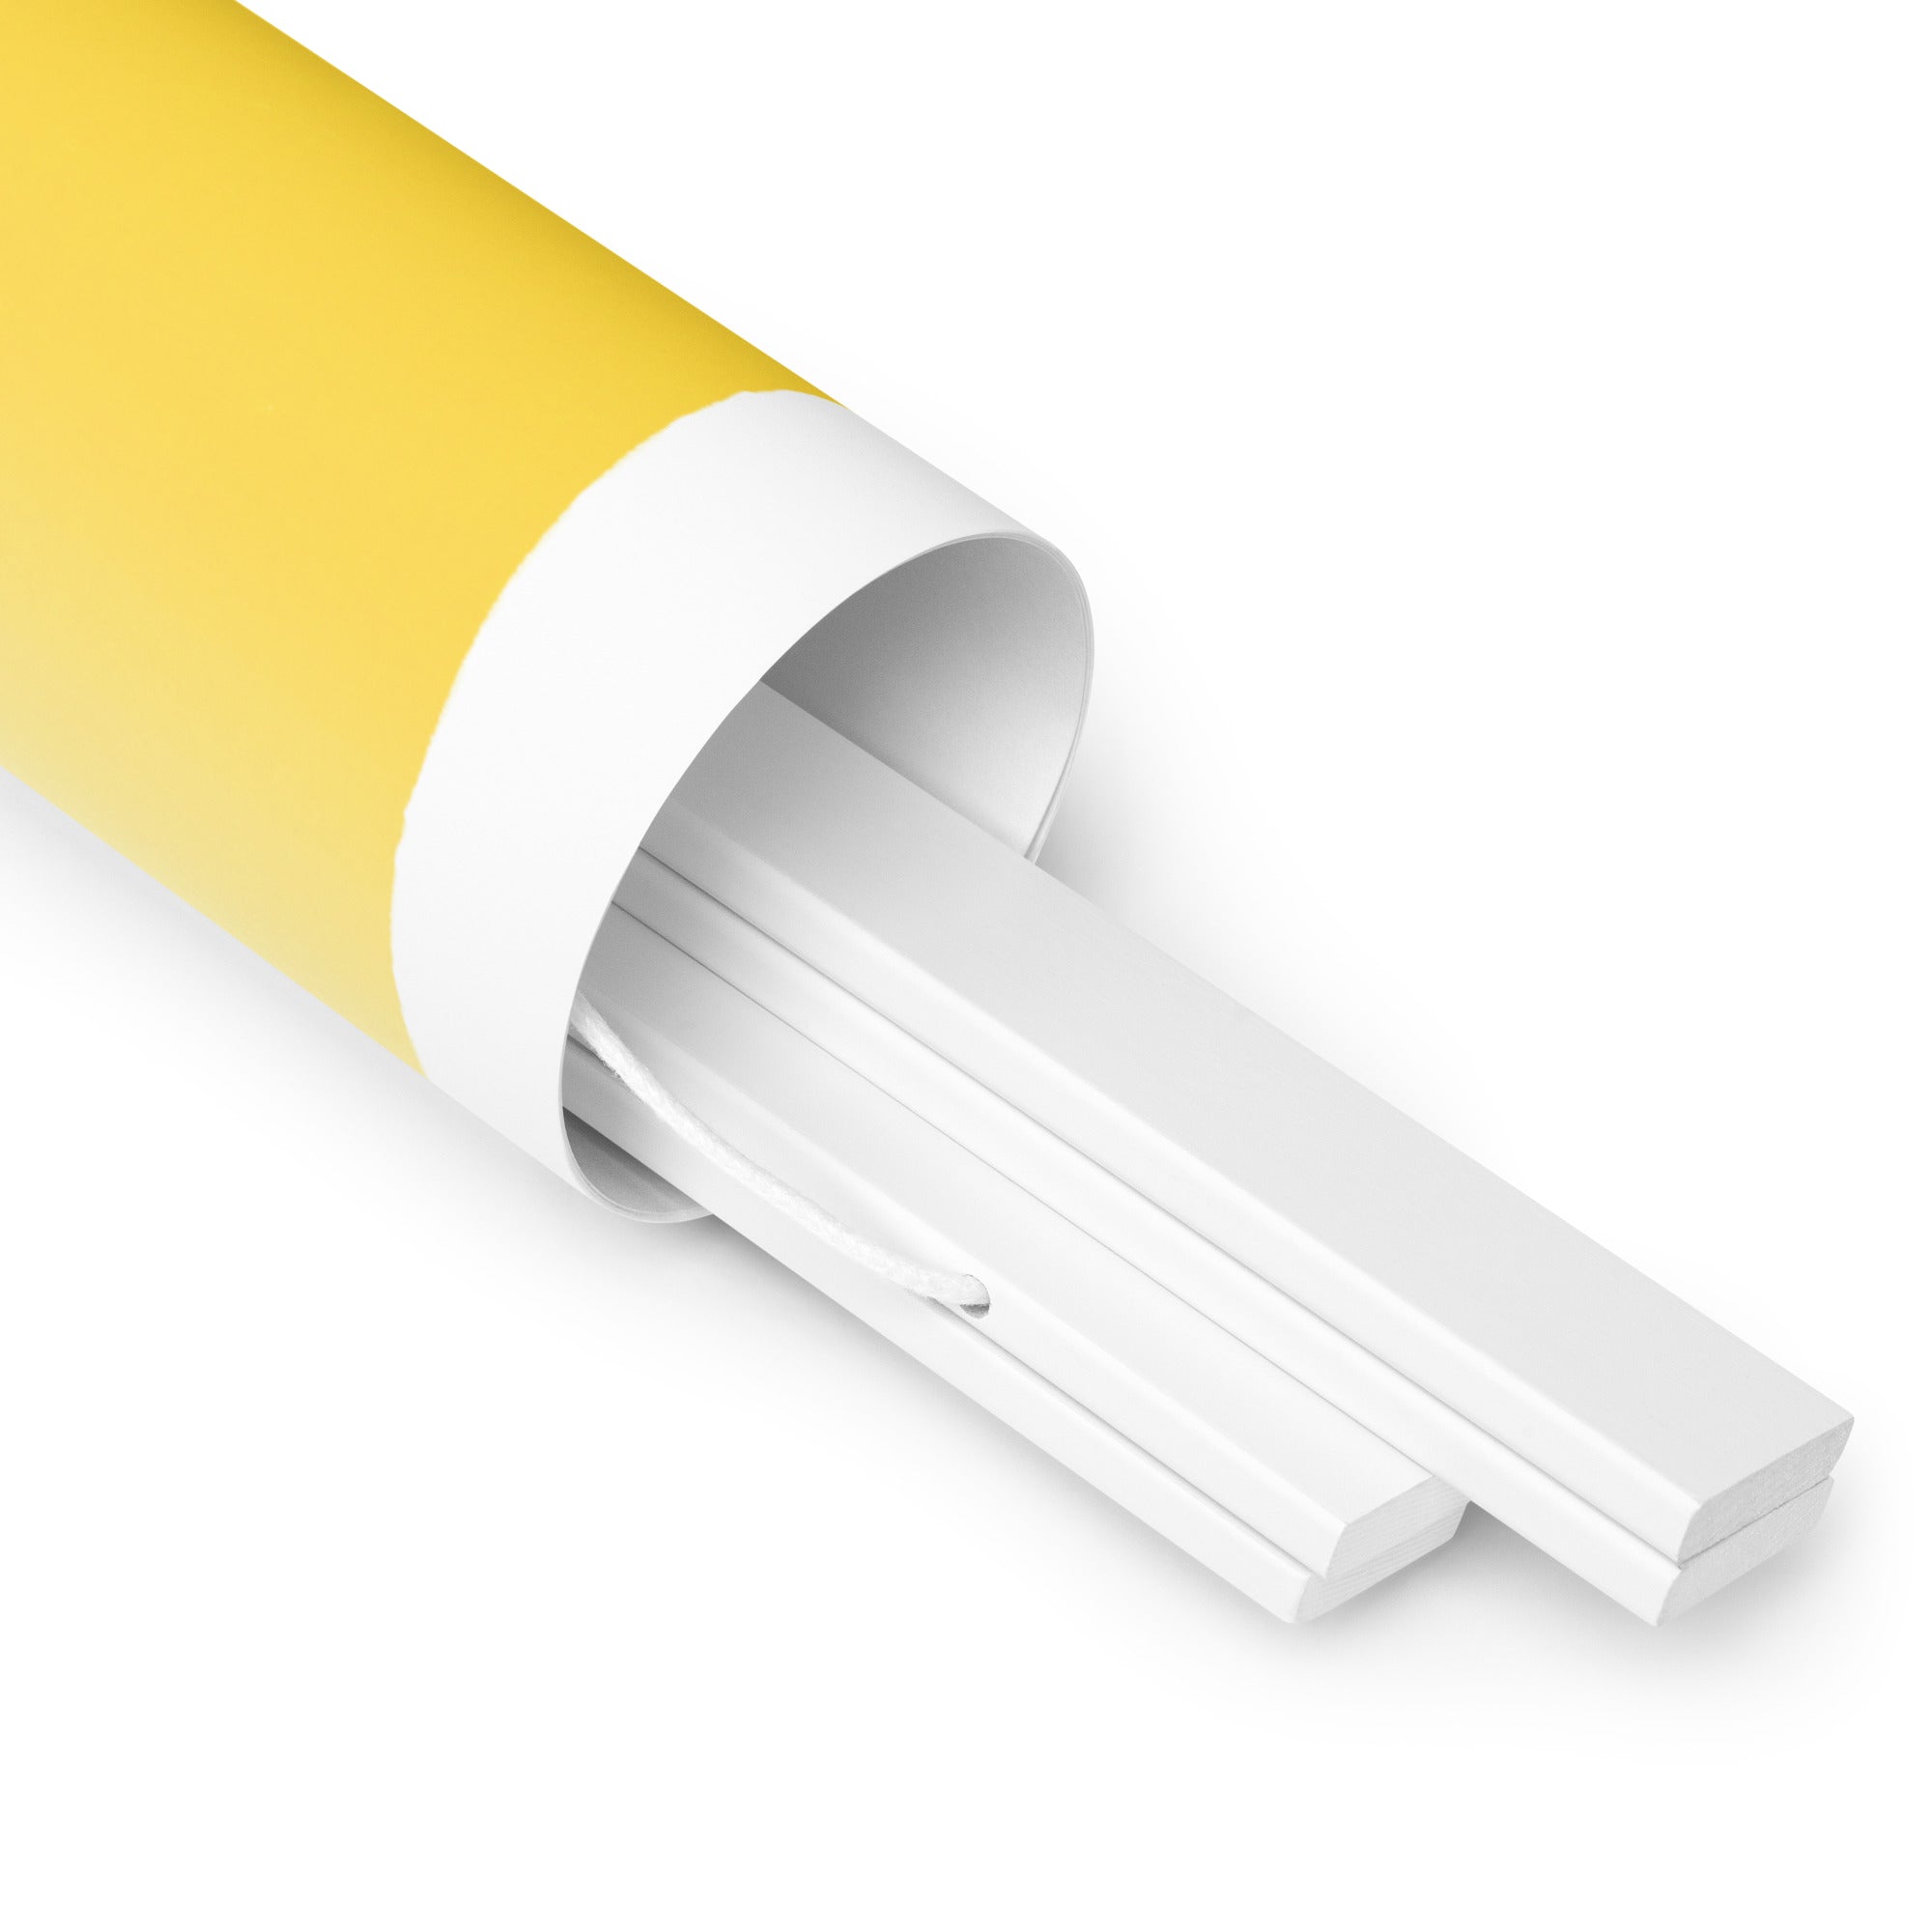 A tube of yellow plastic with custom printing finishes on a white surface containing "The Sweetest Things in Life are Right Here for the Picking" poster from Shop Wyman's.